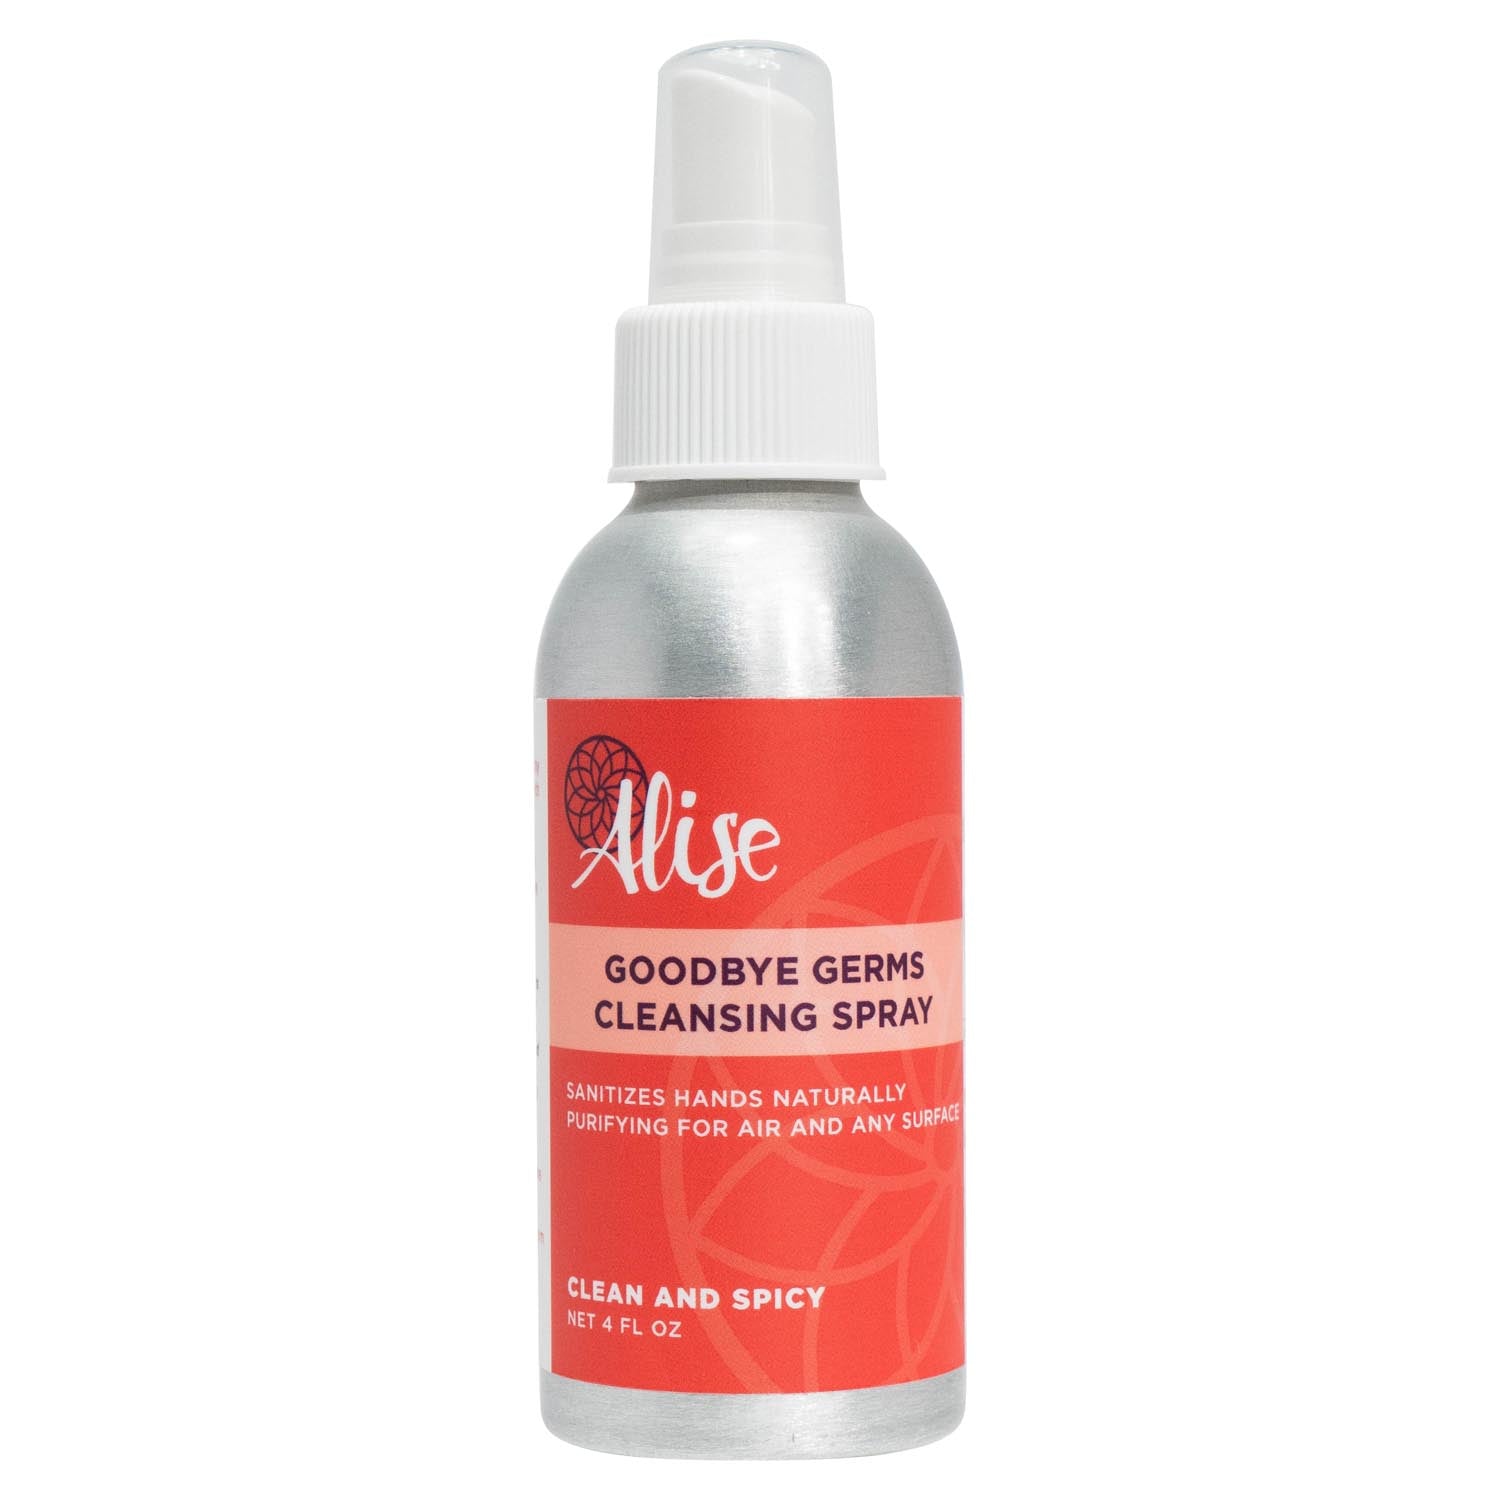 Goodbye Germs Cleansing Spray 4oz handcrafted by Alise Body Care